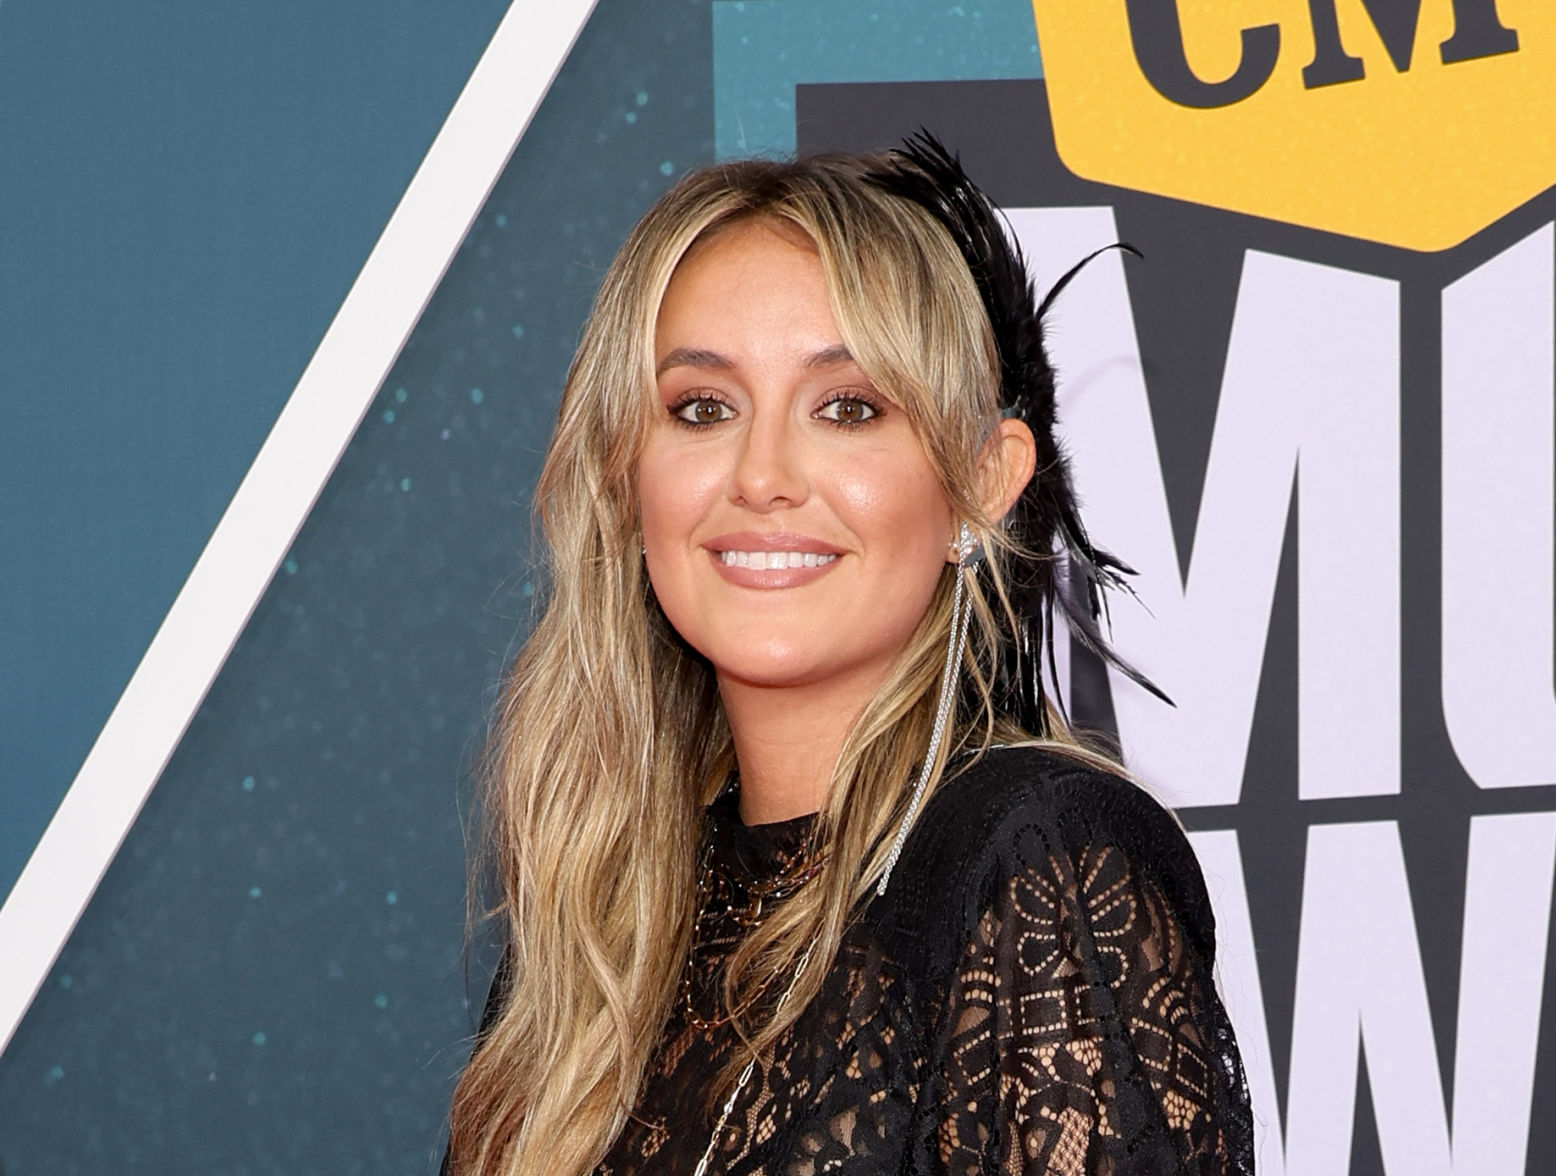 Lainey Wilson Leads 2023 Cmt Music Award Nominations 9174